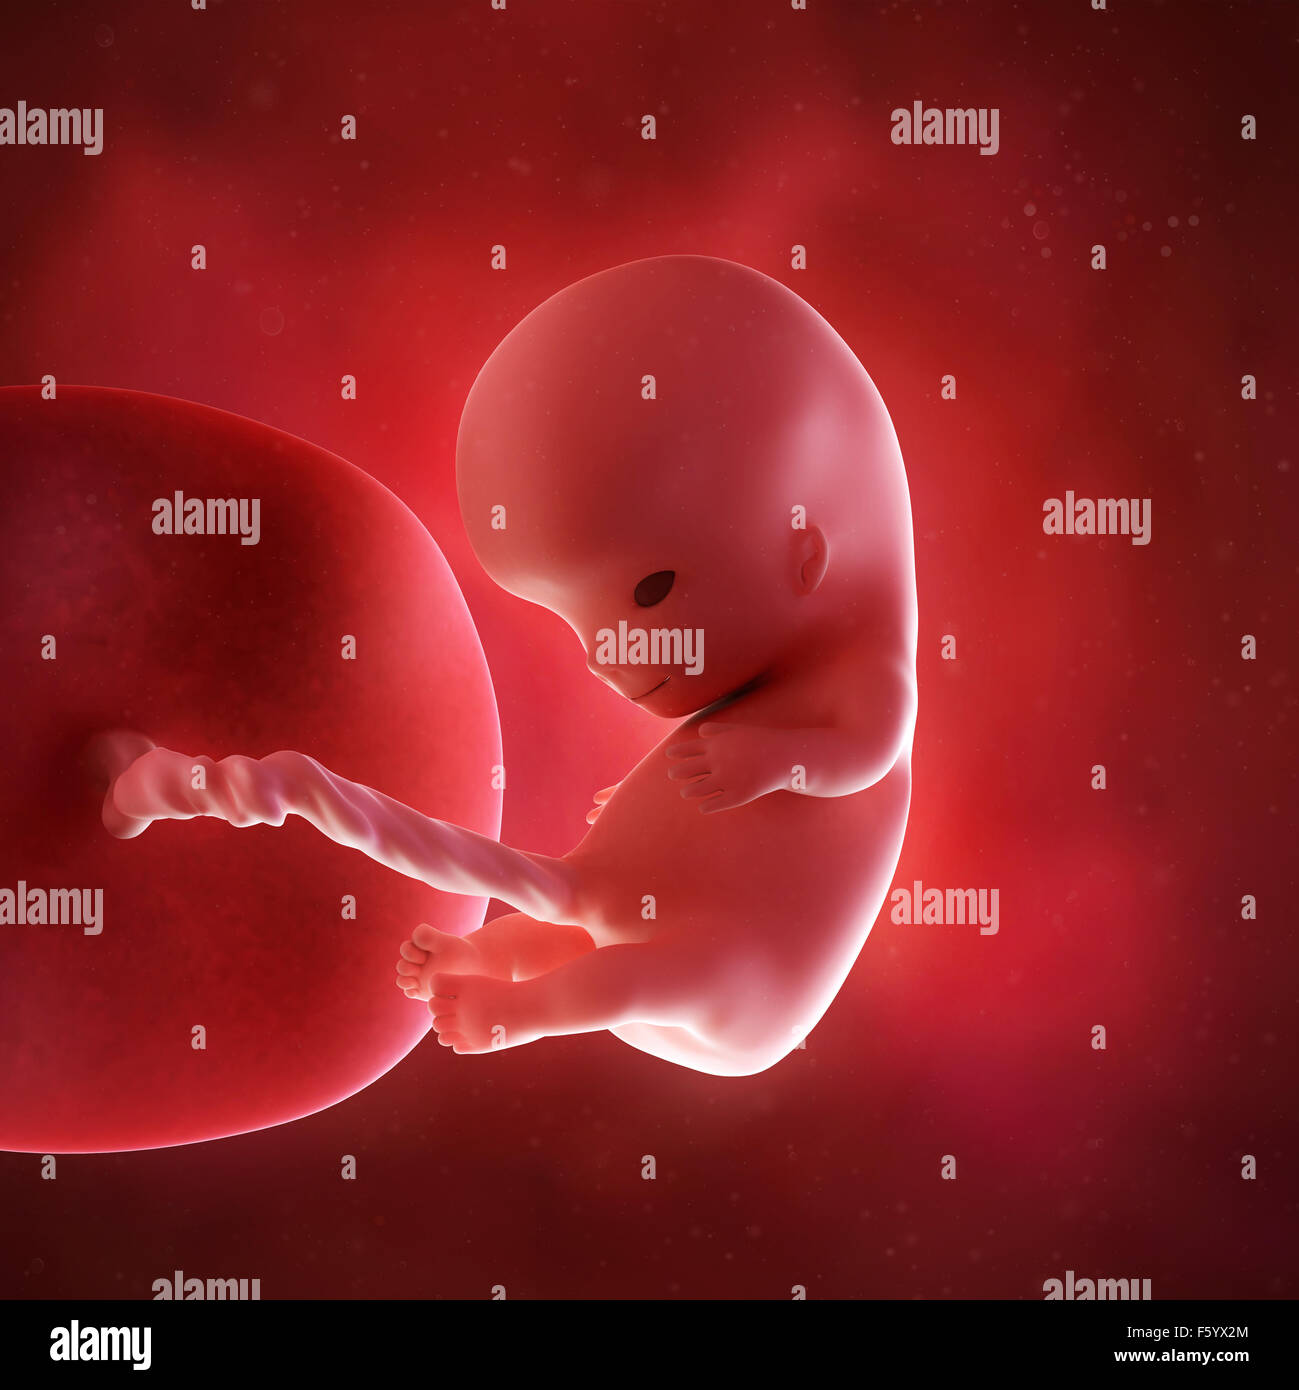 medical accurate 3d illustration of a fetus week 10 Stock Photo